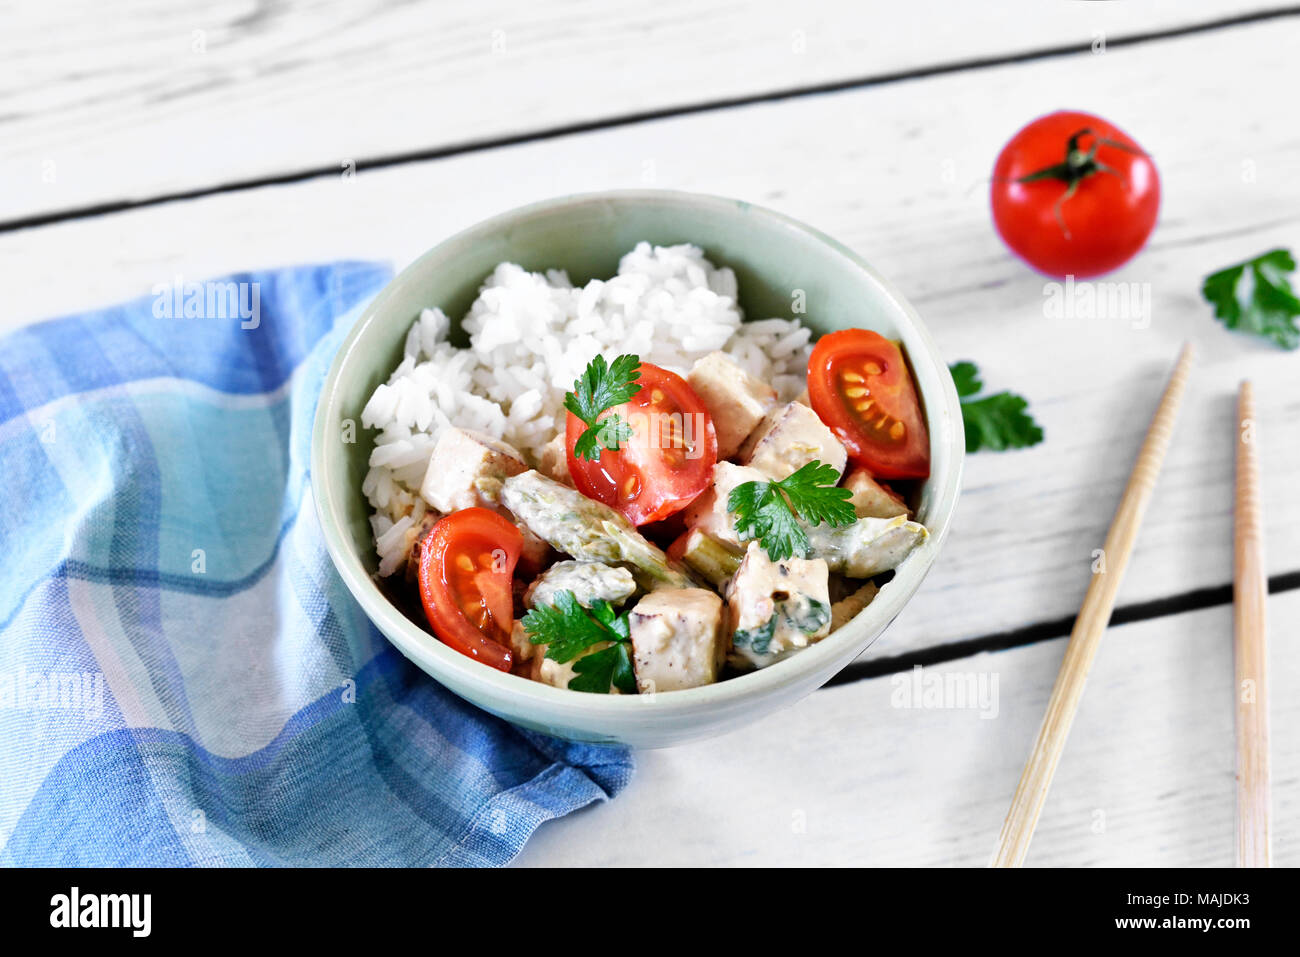 Delicious tofu dish in a bowl, with fresh tomatoes, rice and parsley. Vegan food or vegetarian meal. veggie eating. Stock Photo